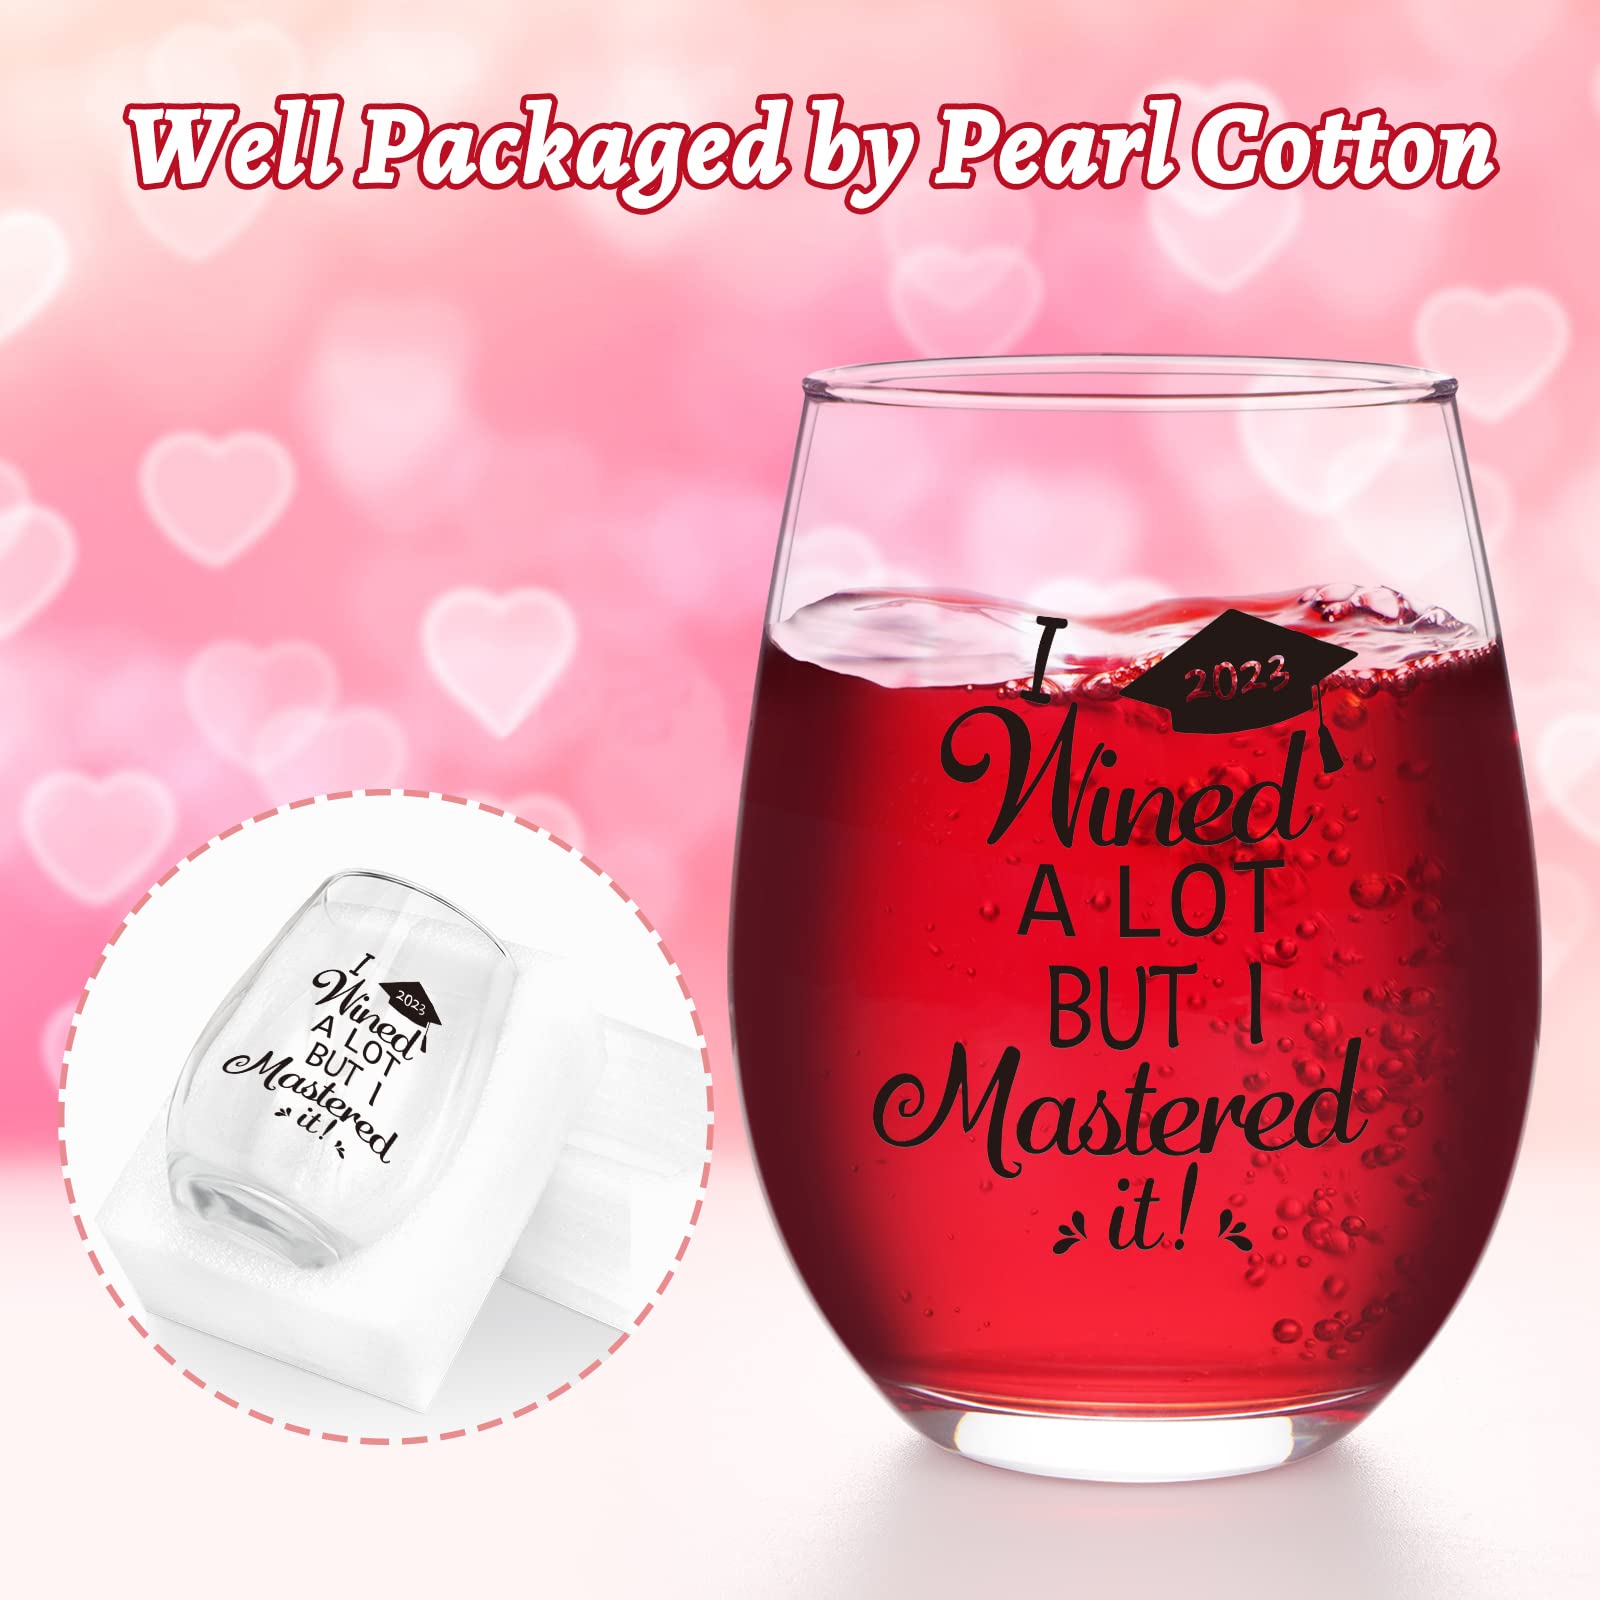 Modwnfy Graduation Gifts, I Wined A Lot, But I Mastered It Stemless Wine Glass with Key Chain and Card, College Graduation Gifts for Her Him Men Women Friends University Graduate Master MBA, 17 OZ